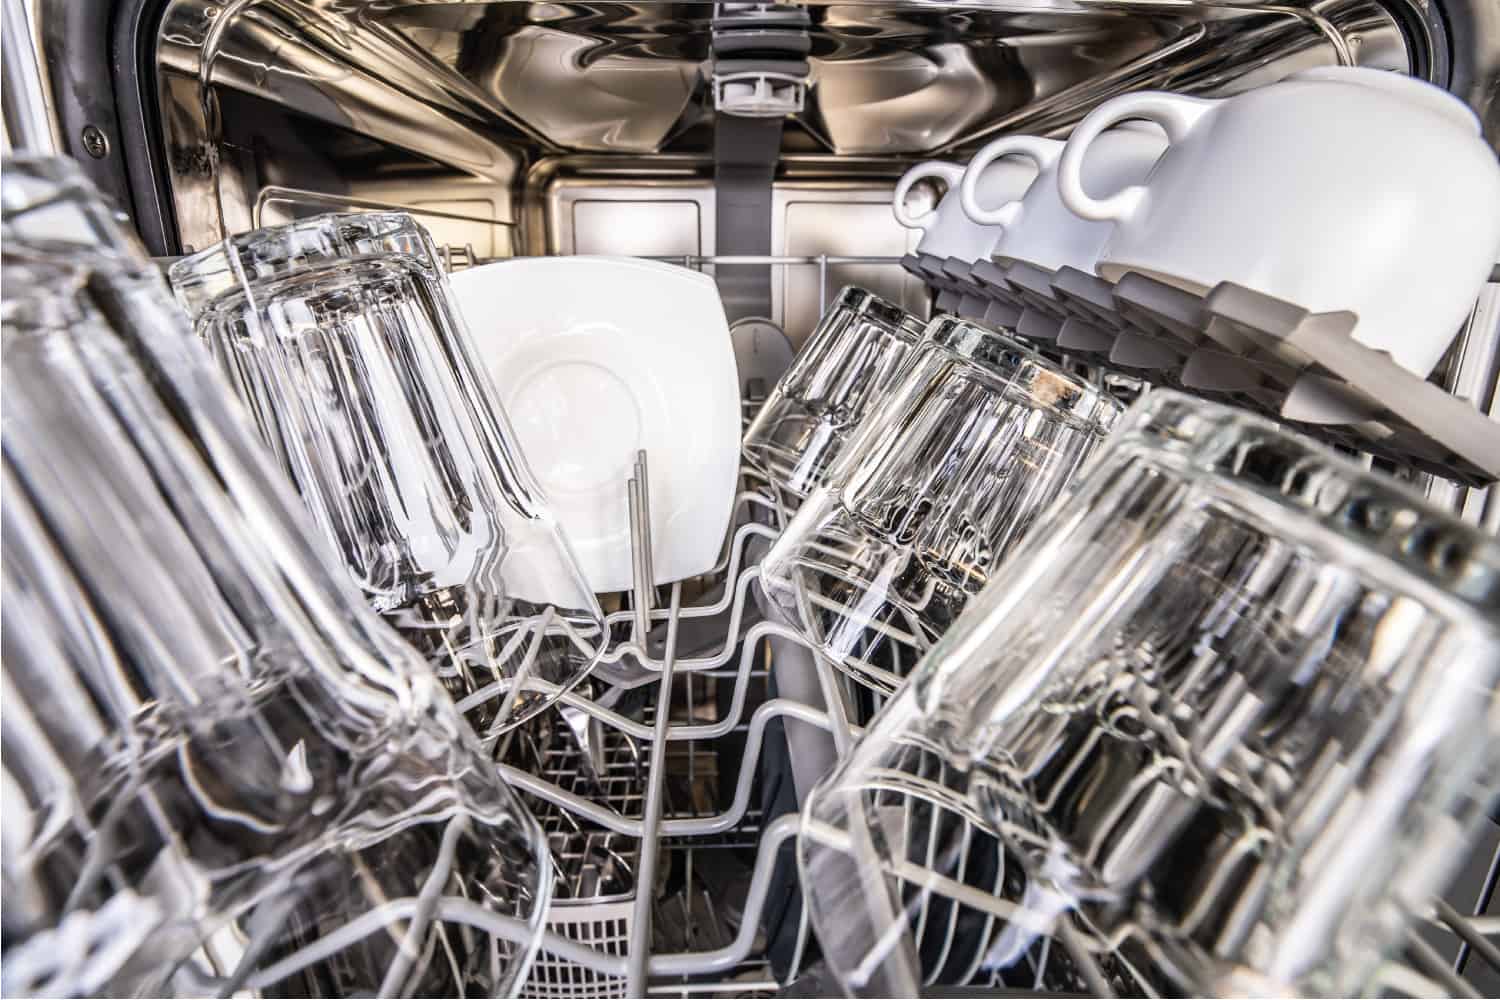 Upper cell of dishwasher with clean shiny cups and glasses